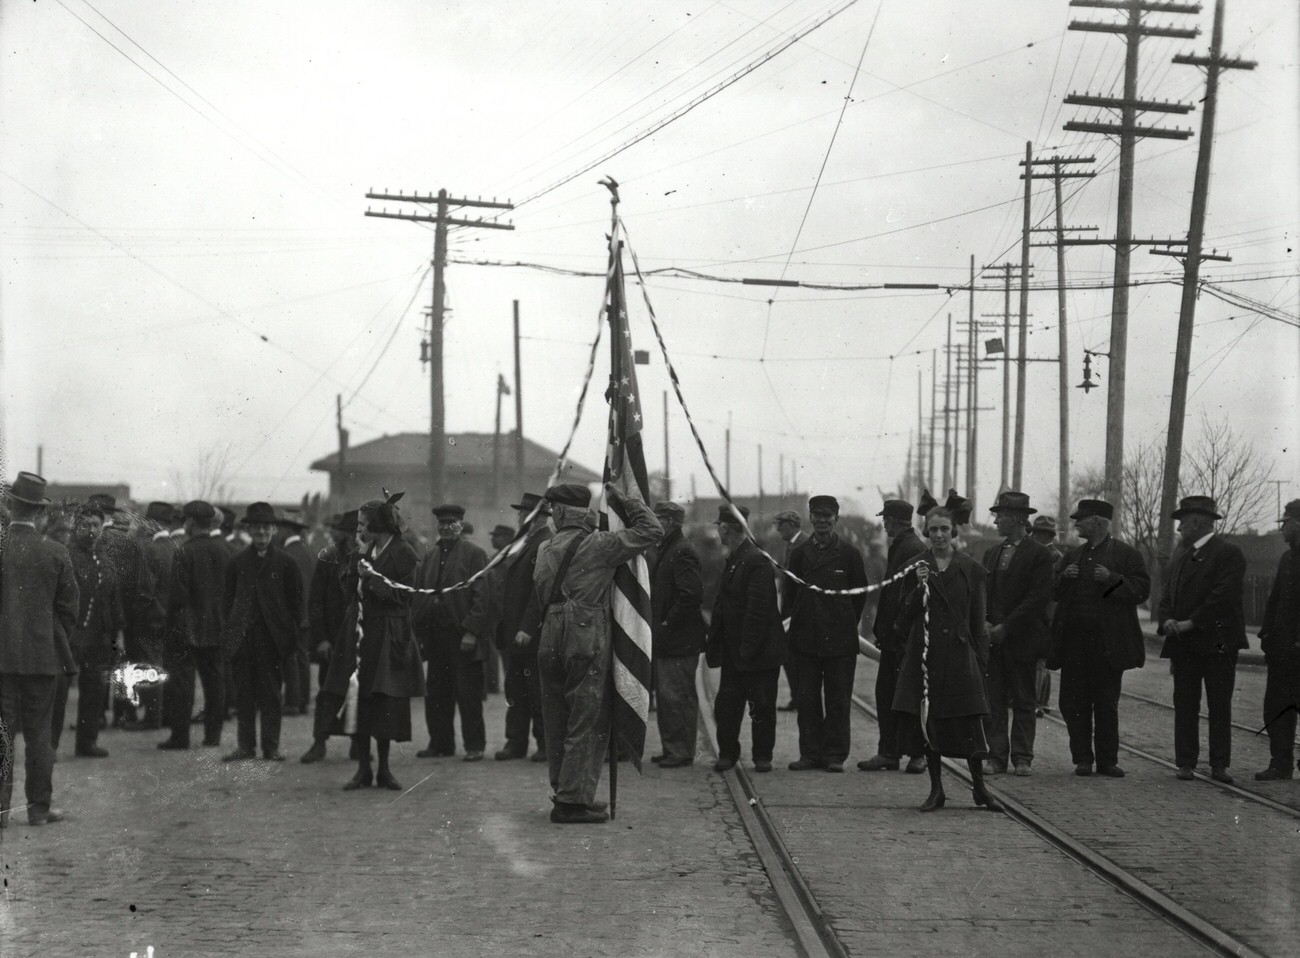 Buckeye Steel patriotic display, possibly a May Day celebration, founded October 1902, located on Parsons Avenue, merged with Worthington Industries in 1980, circa 1920s